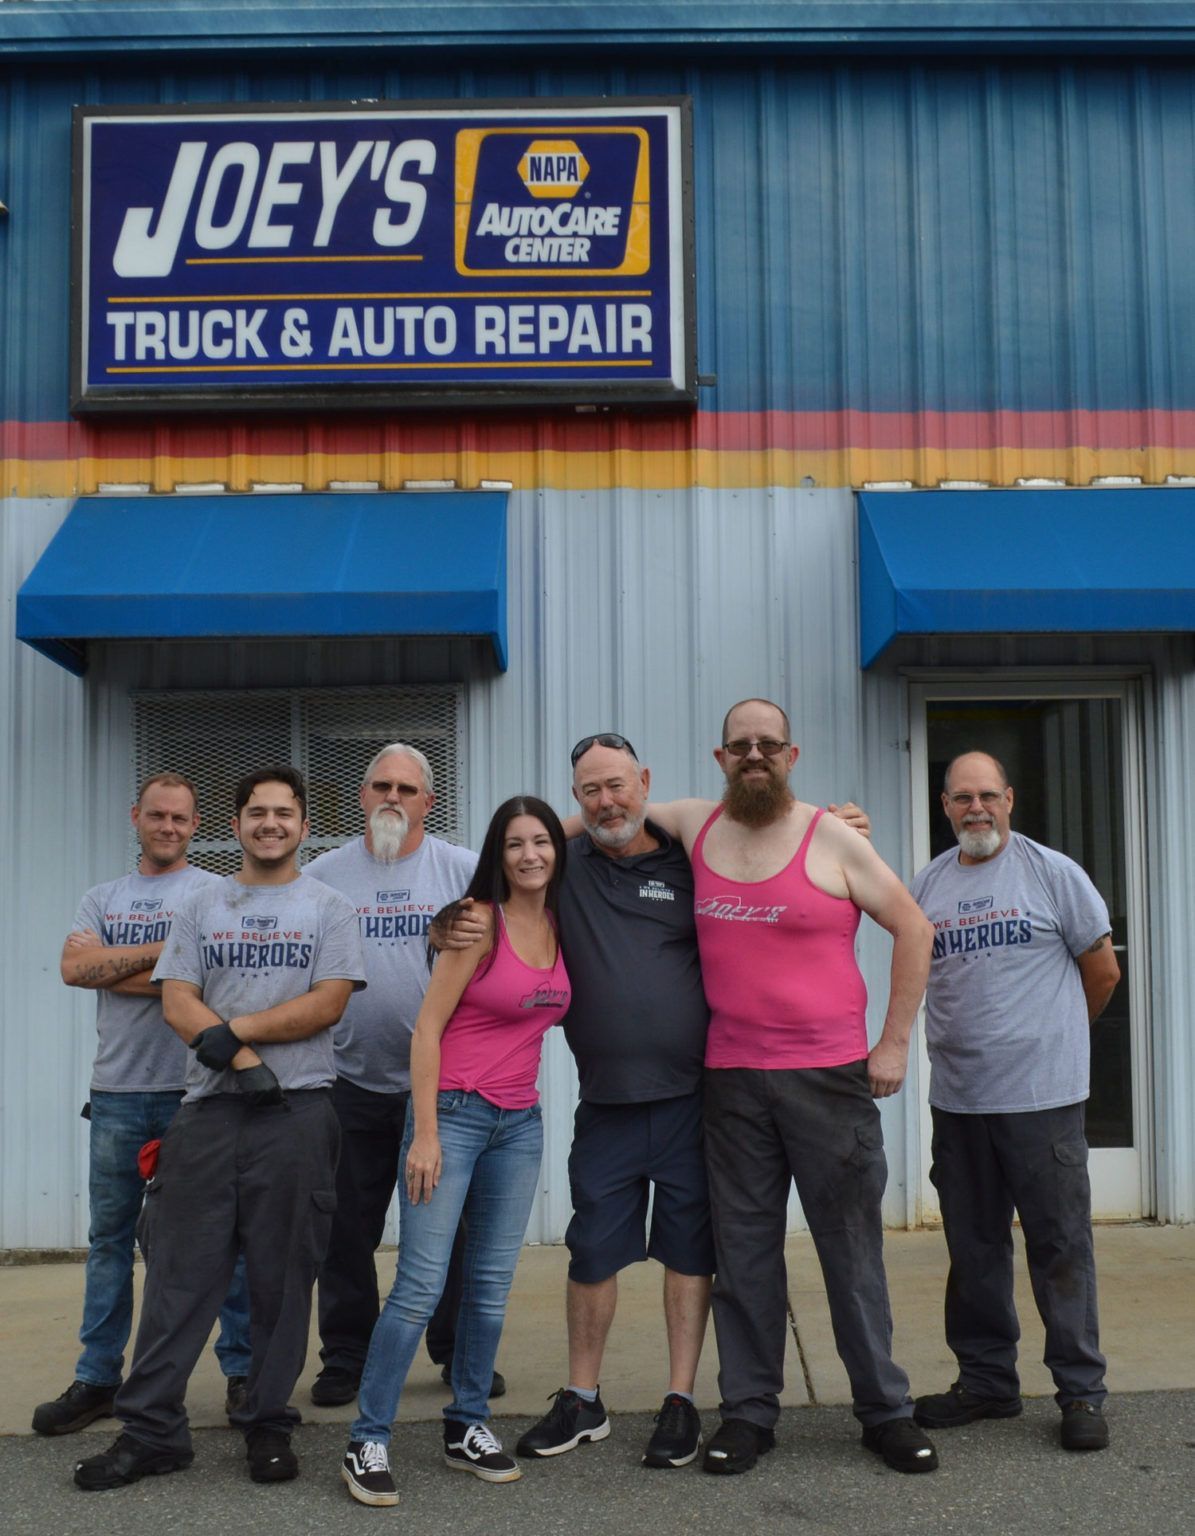 Our crew | Joey's Truck & Auto Repair